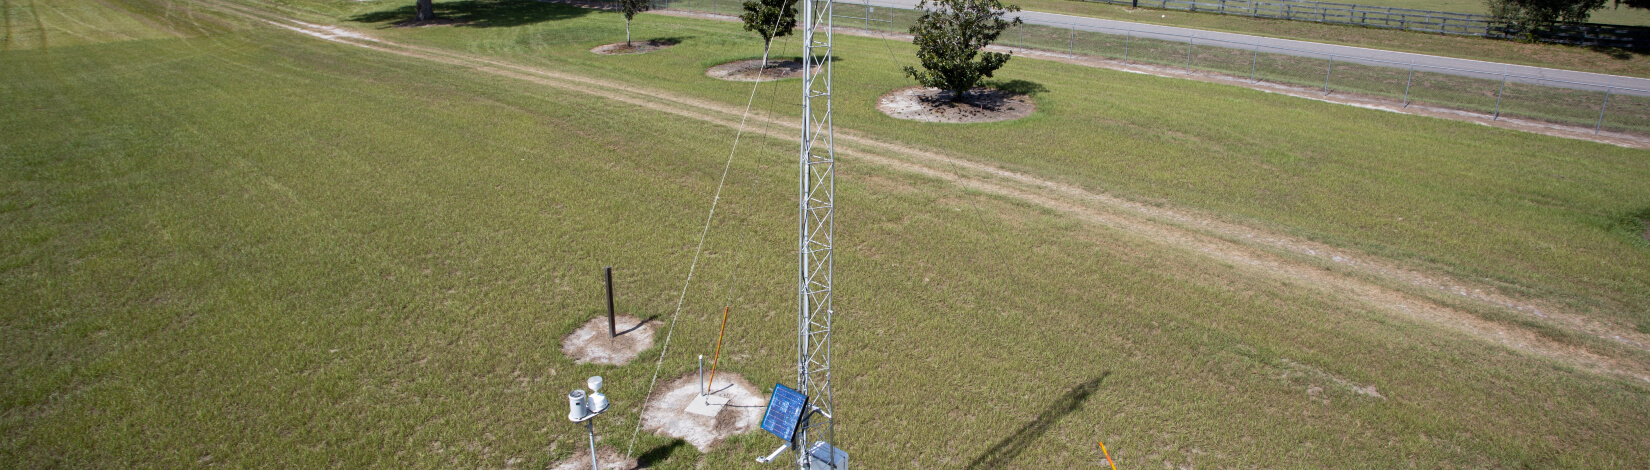 FAWN weather station tower at the Plant Science Research and Education Unit